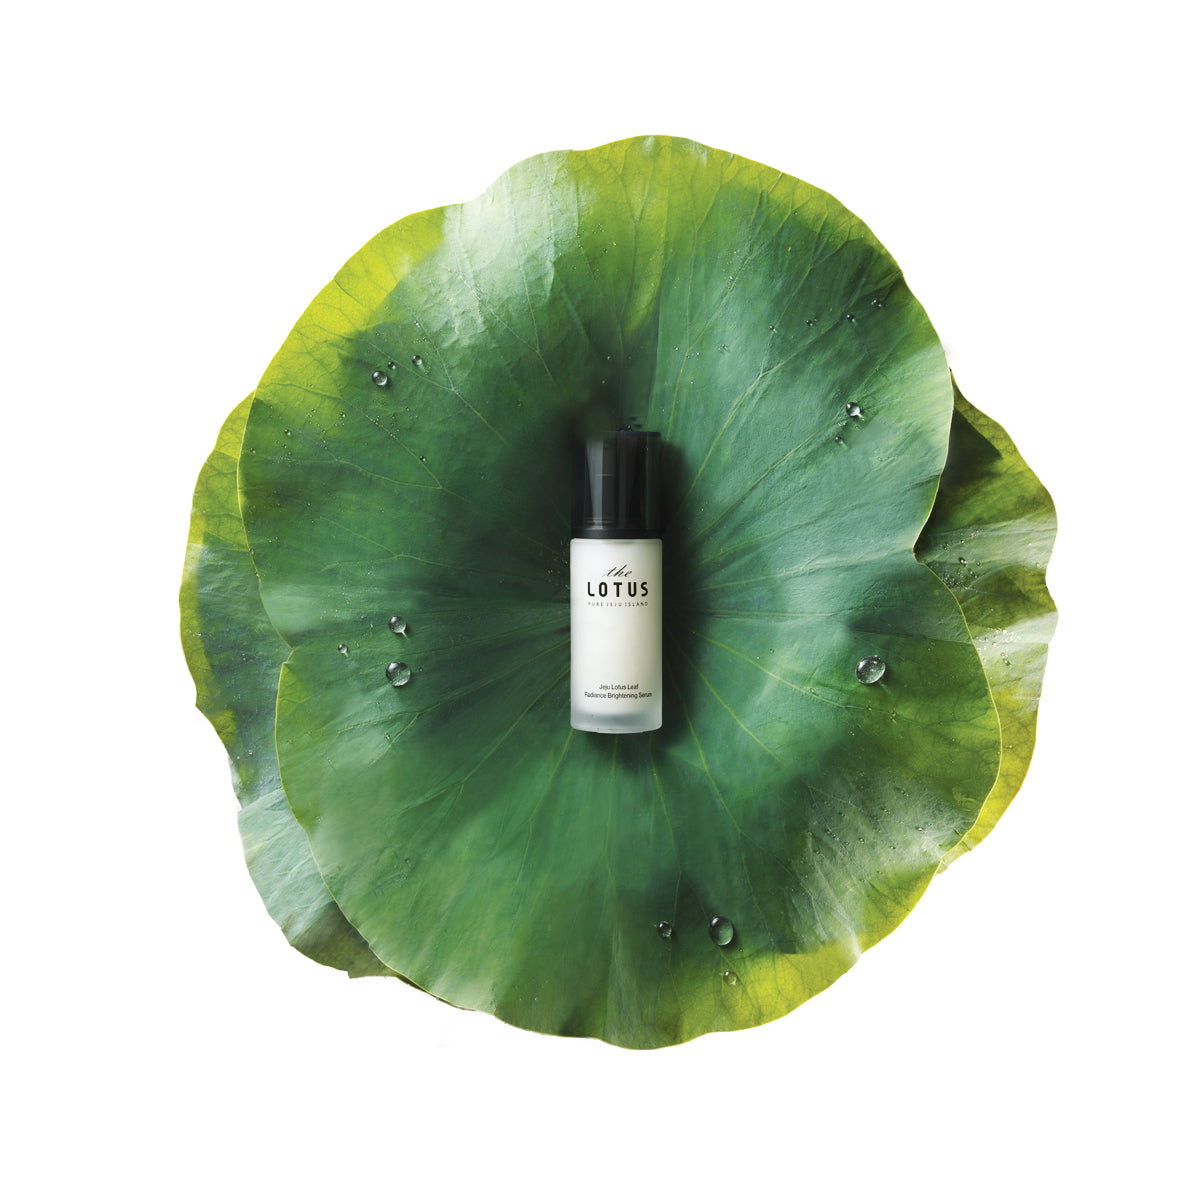 The Lotus Leaf Extract Sleeping Pack Review by @skincarebymoonlight